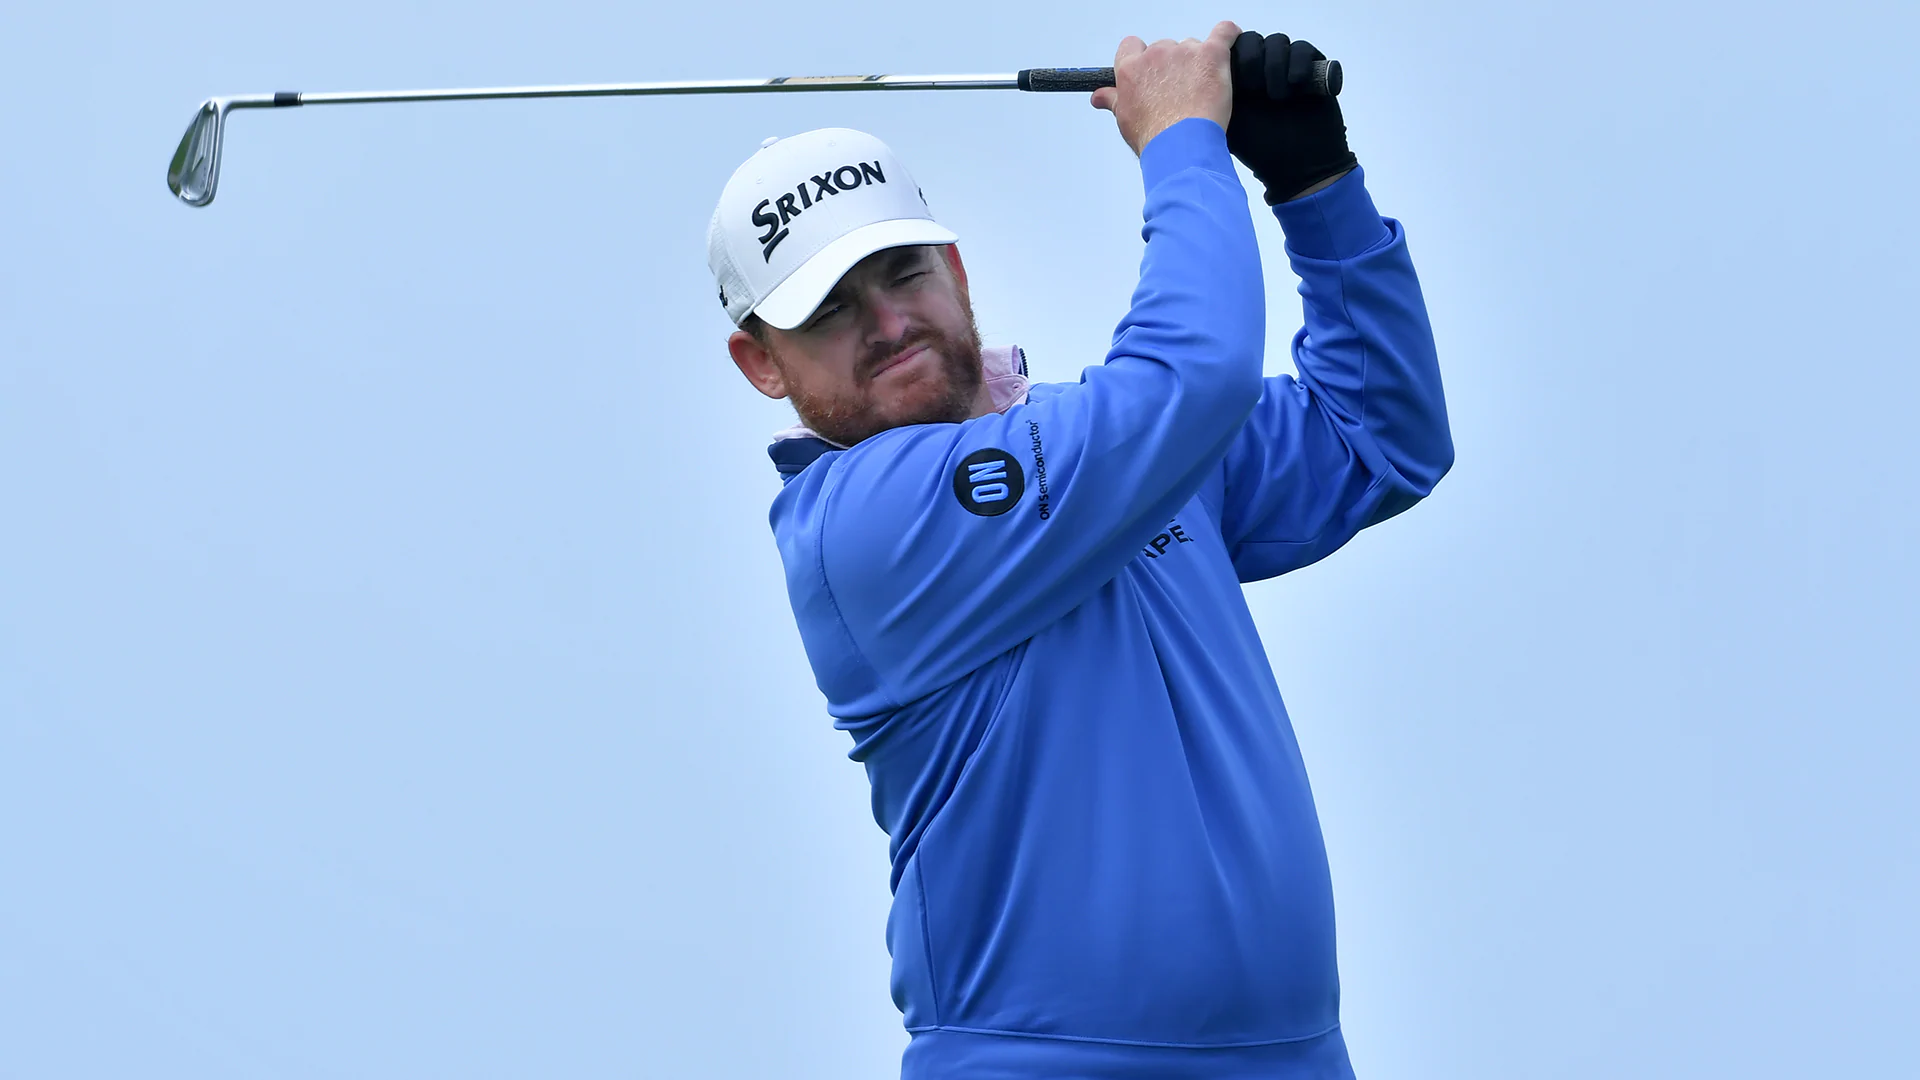 J.B. Holmes, Charles Howell III latest to WD from PGA Championship